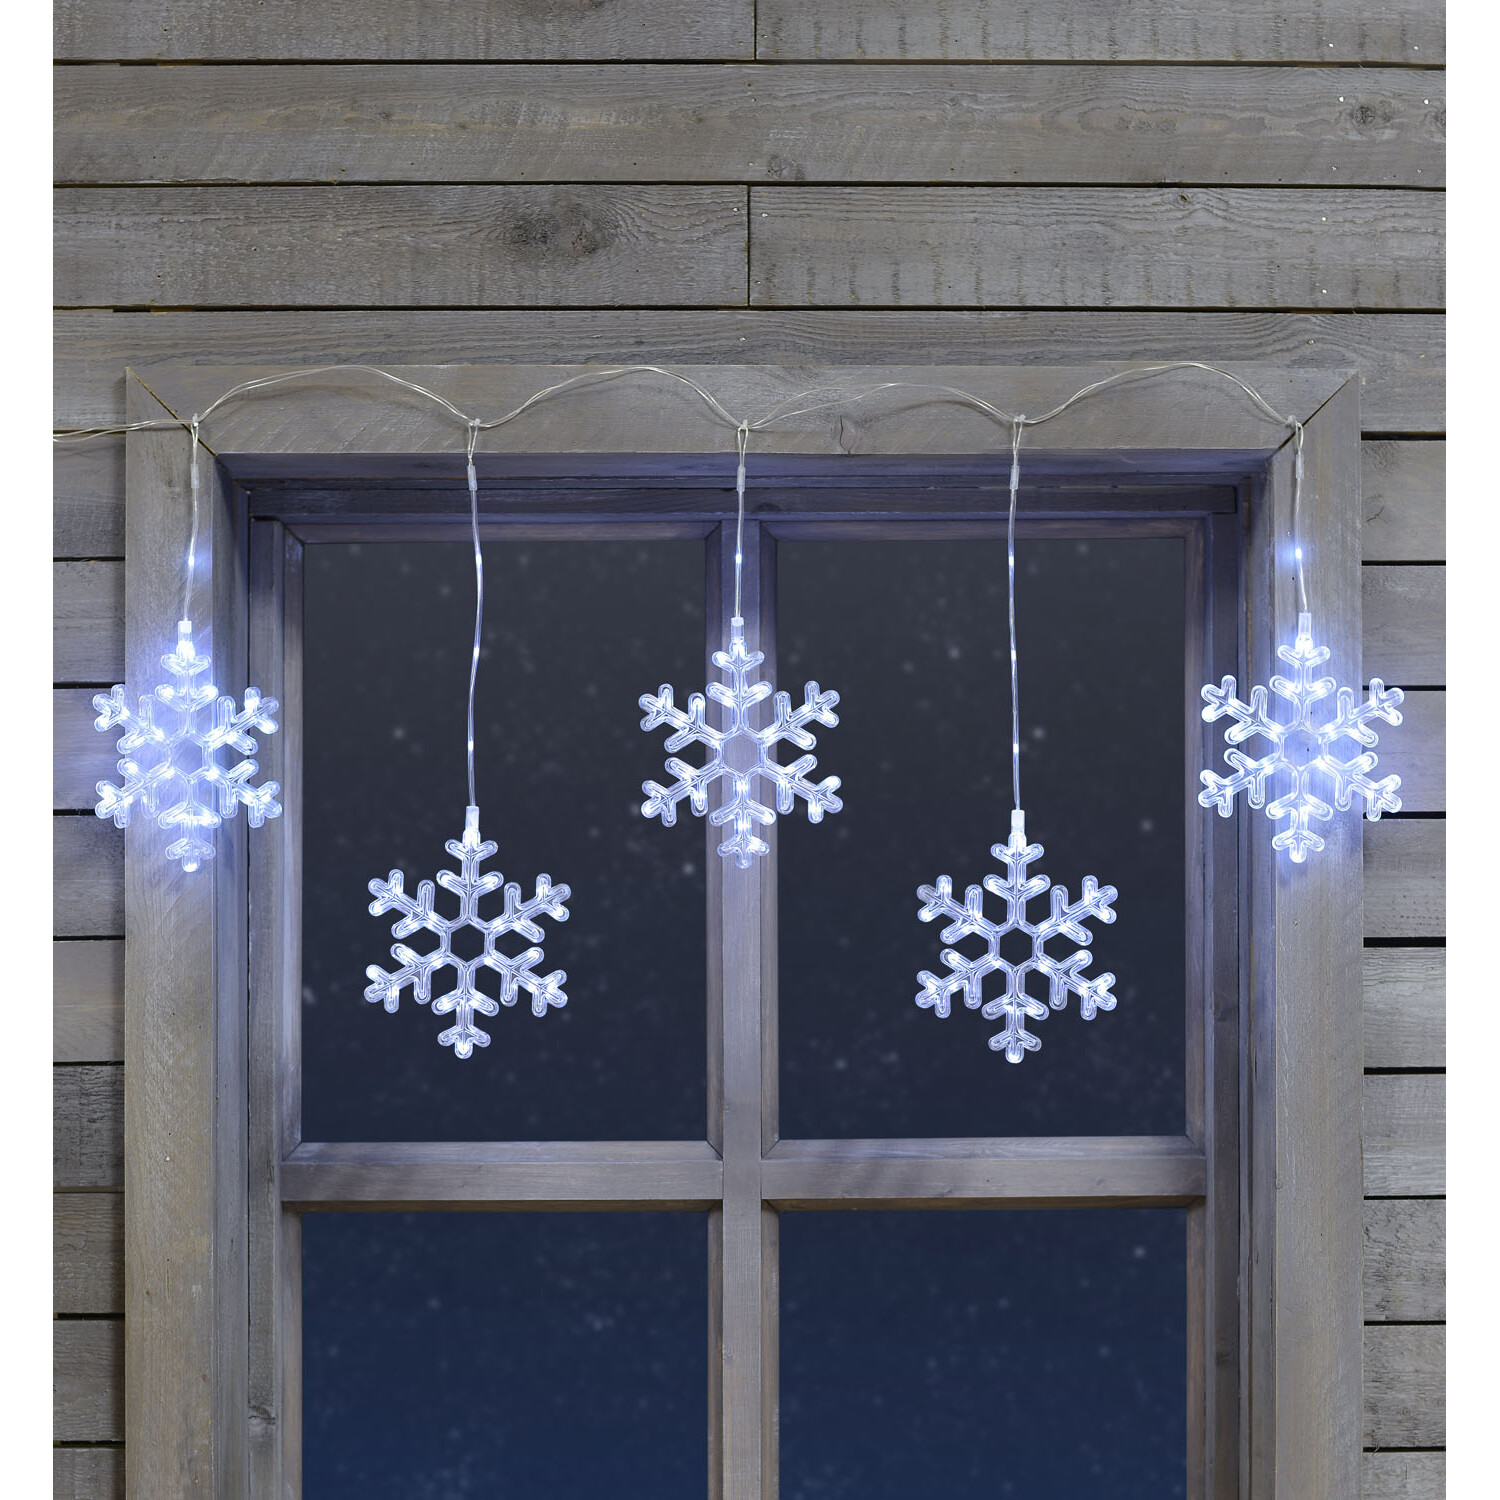 124 LED Snowflake Curtain Light - Clear Image 1